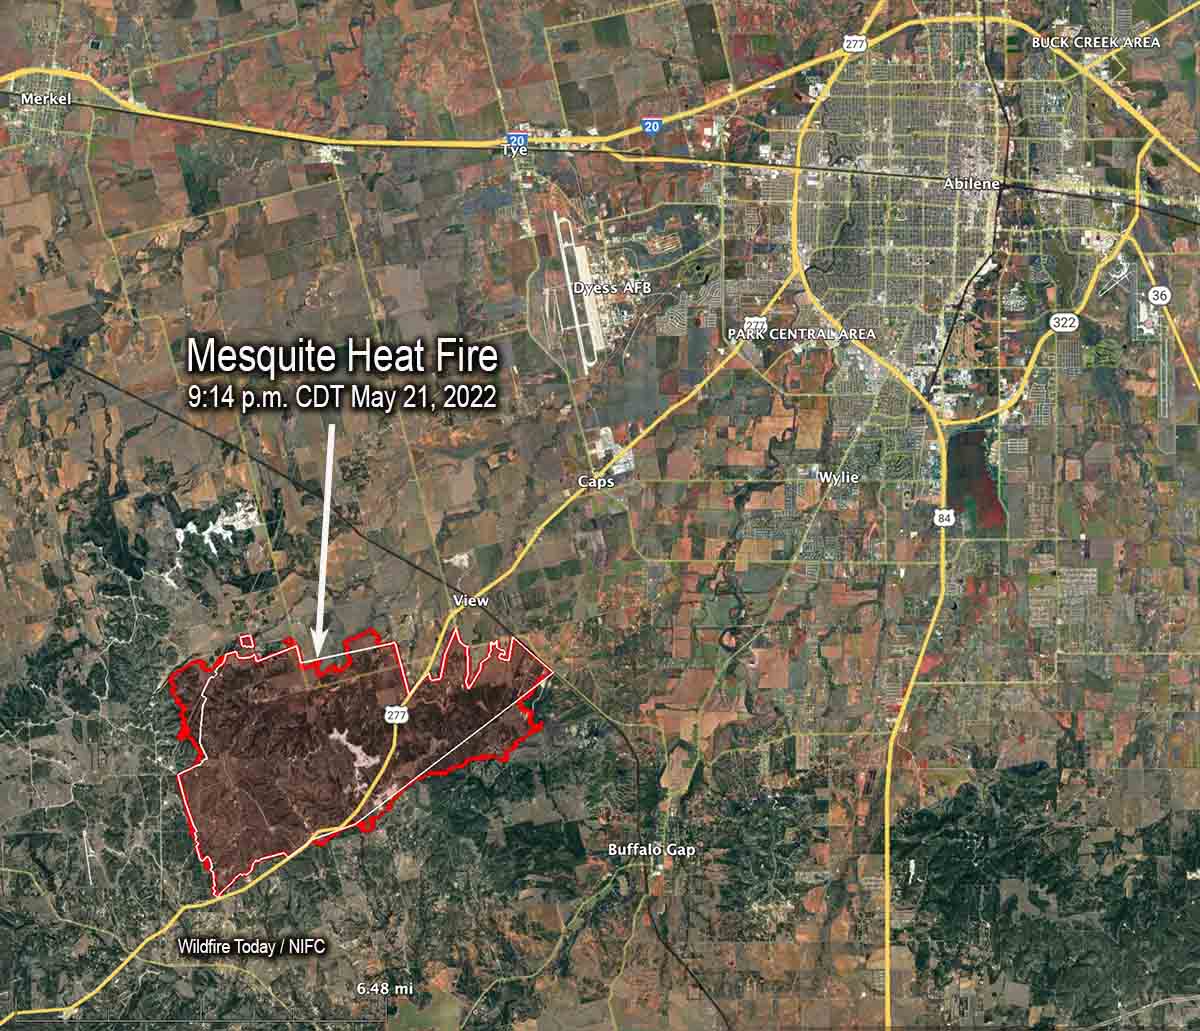 Map of the Mesquite Heat Fire in Texas